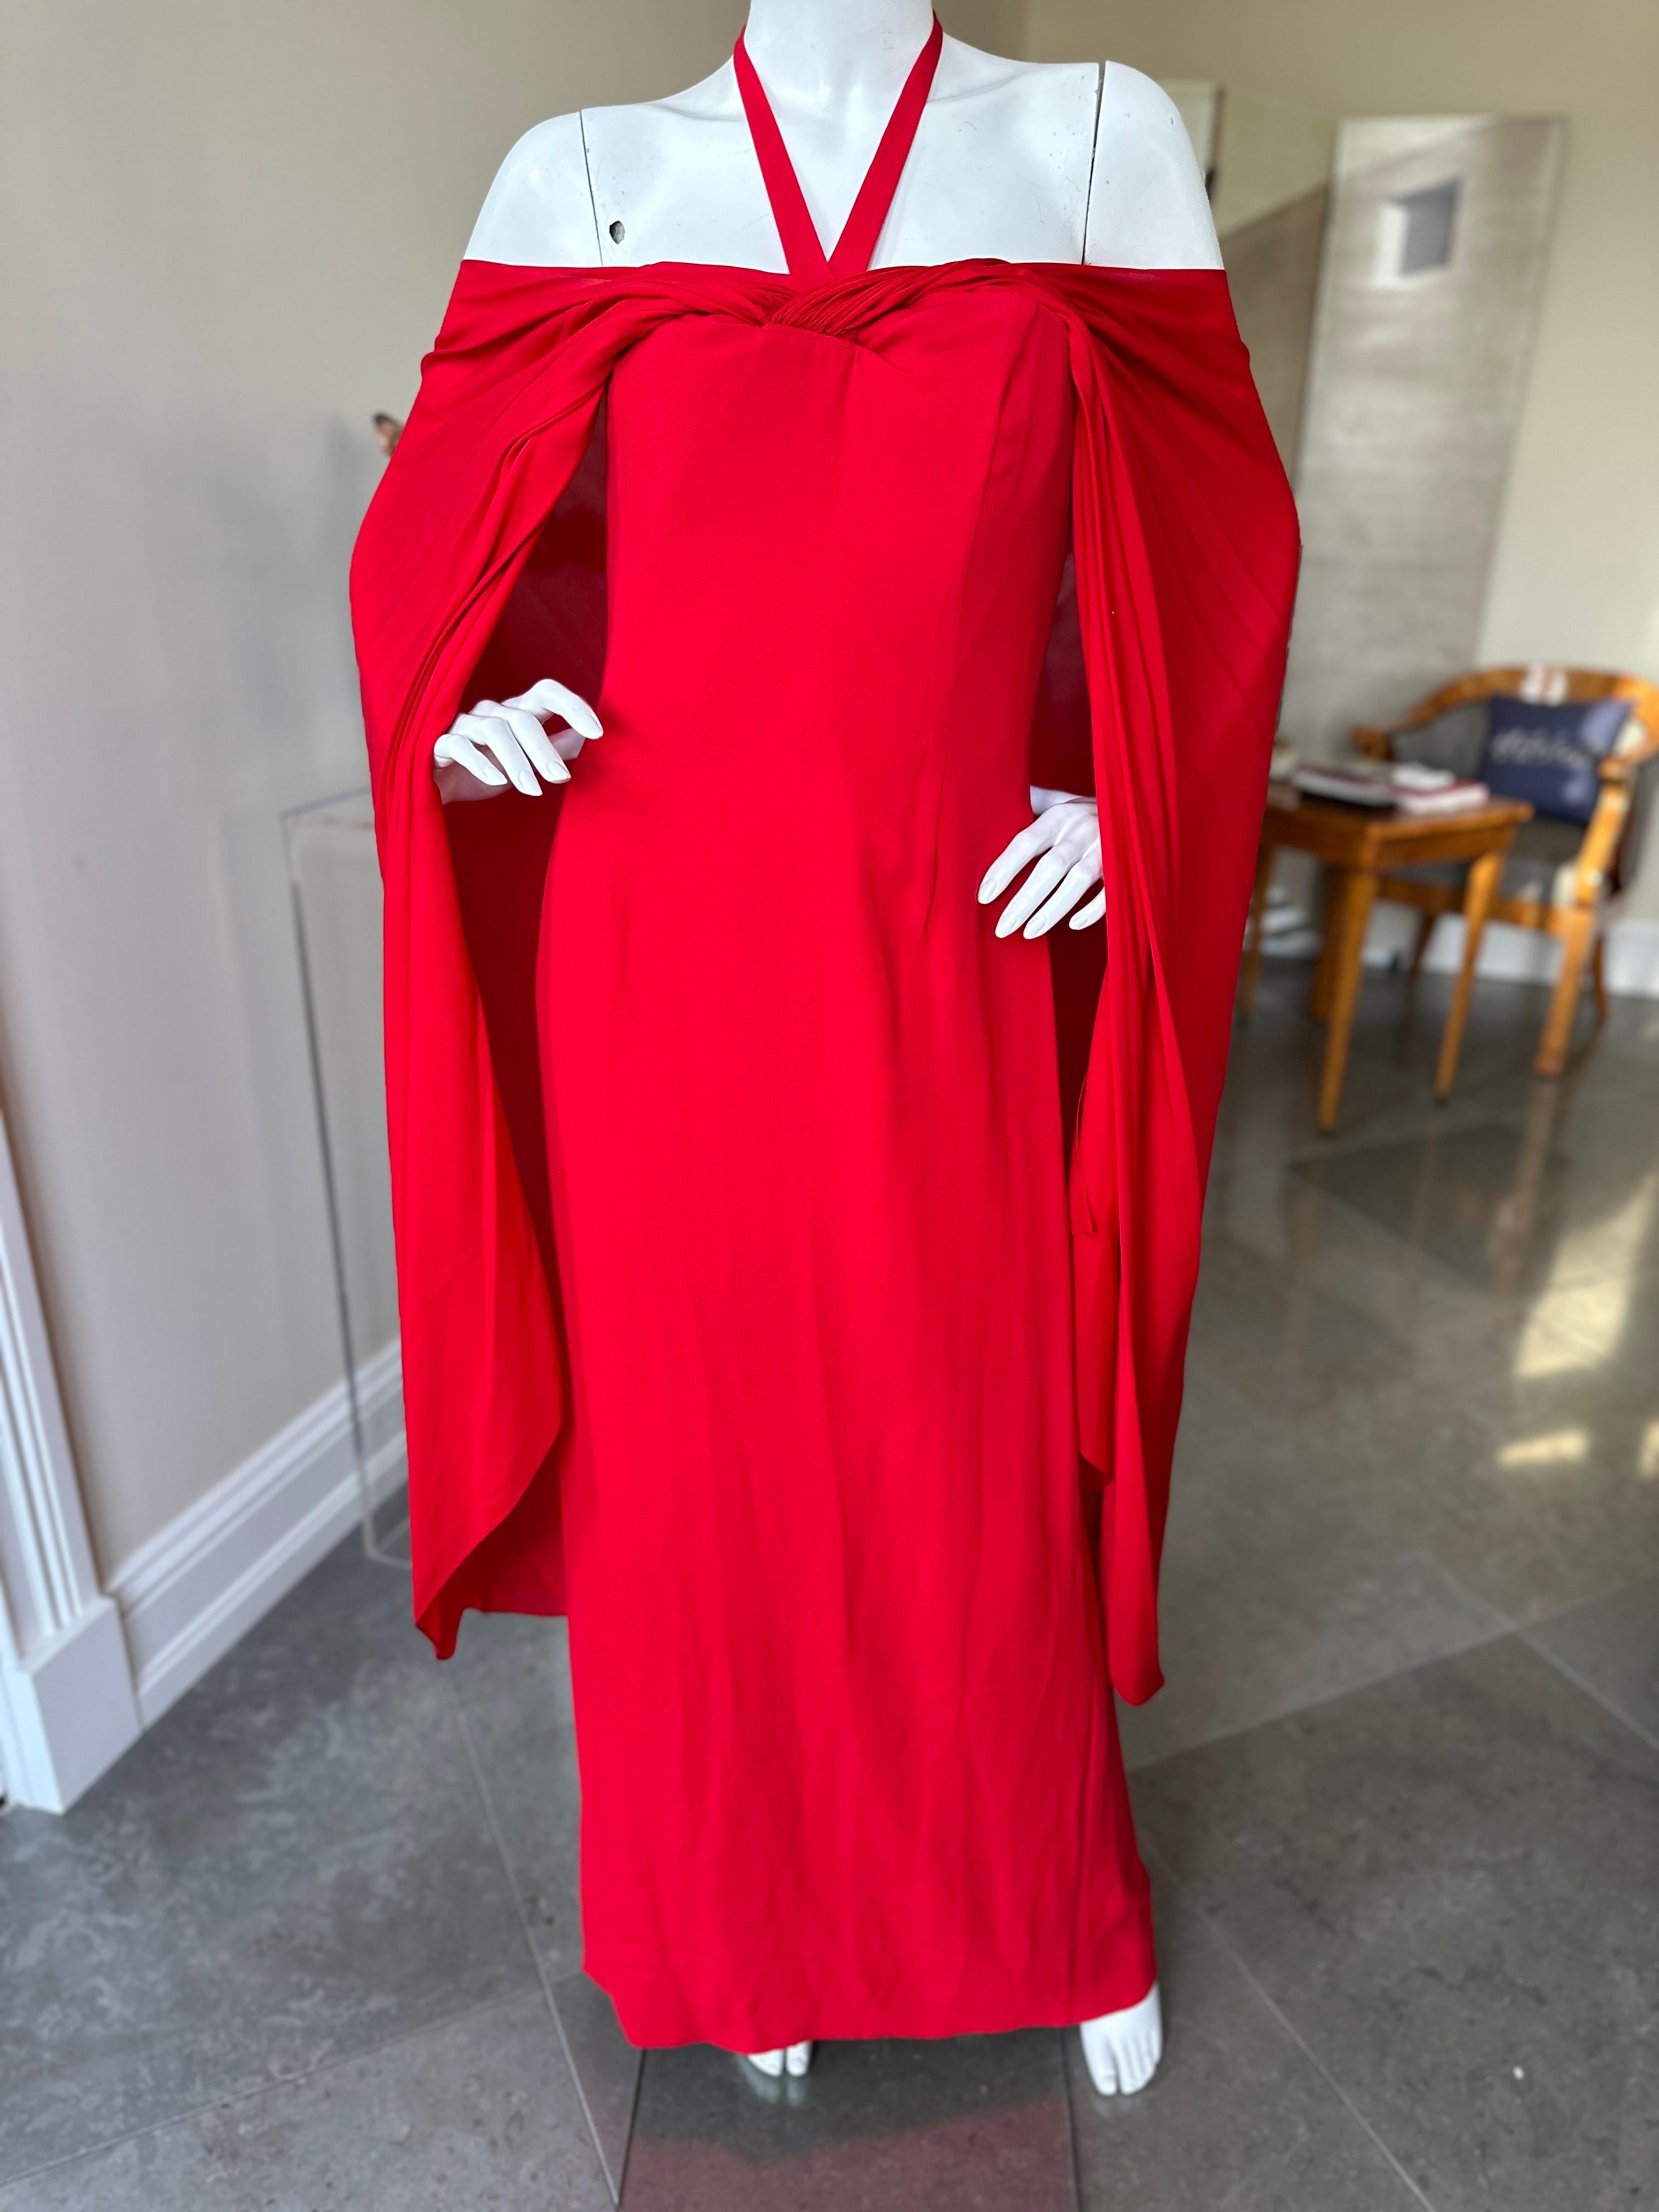 Women's Bill Blass Vintage 1980's Red Silk Evening Dress with Attached Cape For Sale